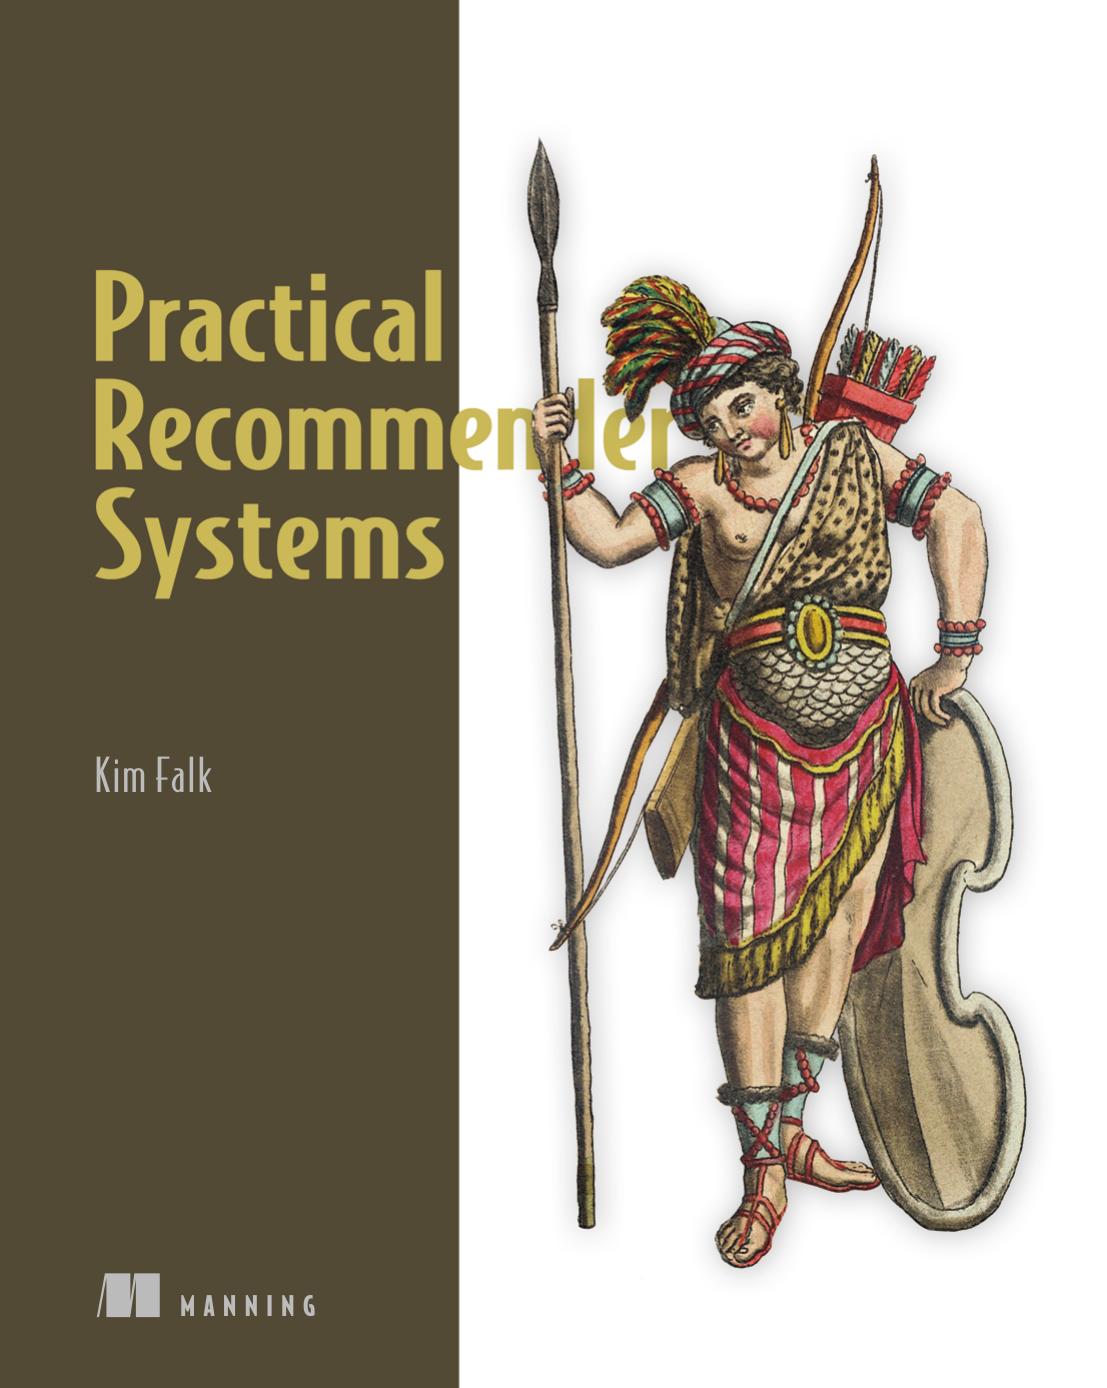 Practical Recommender Systems by Kim Falk